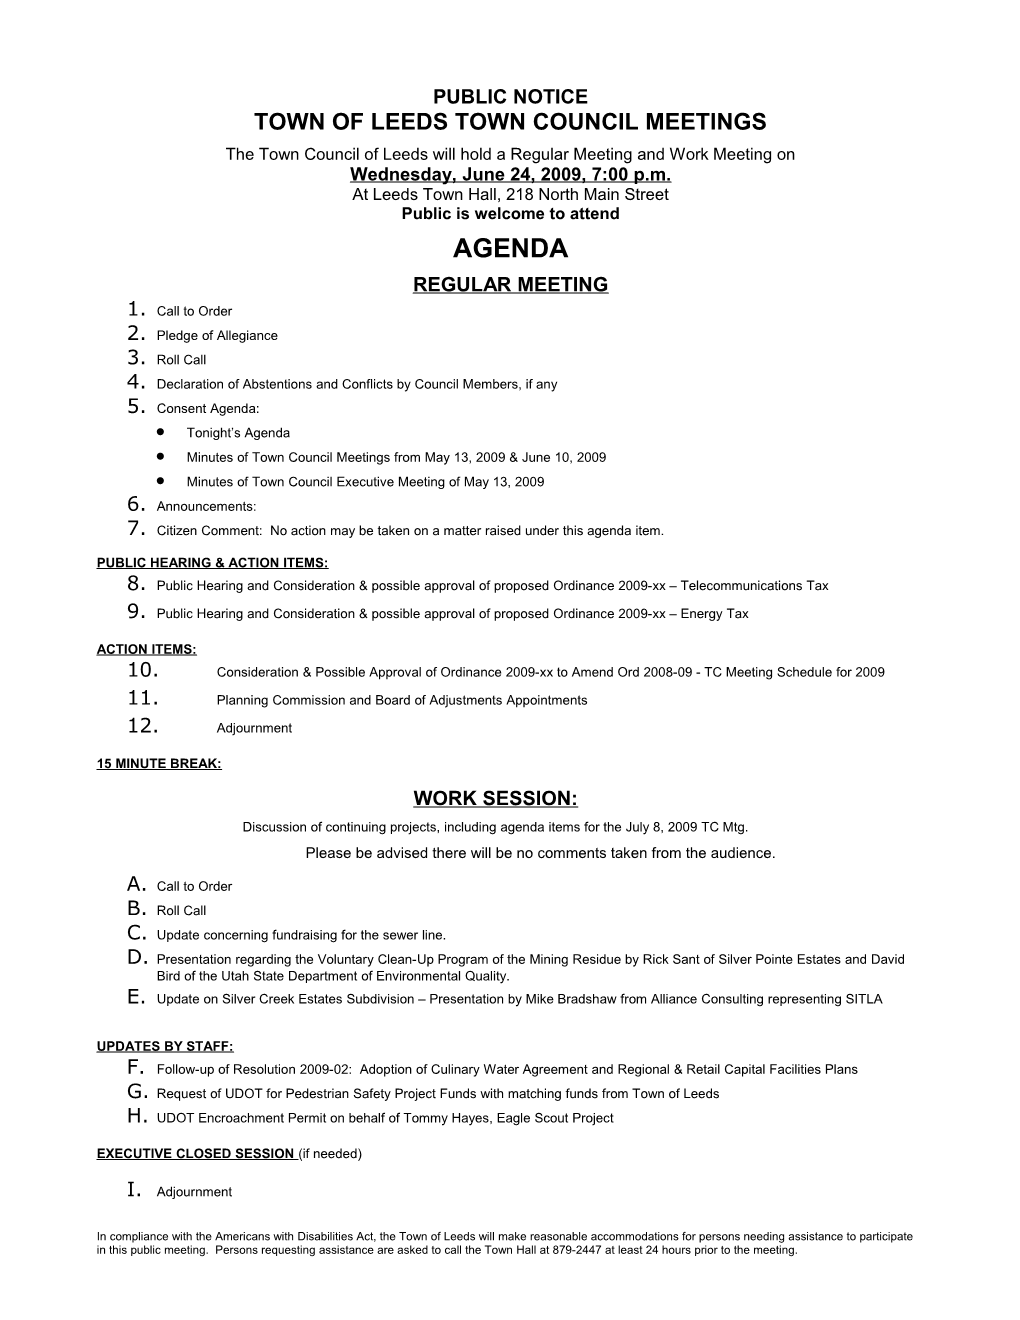 Town of Leeds Town Council Meetings